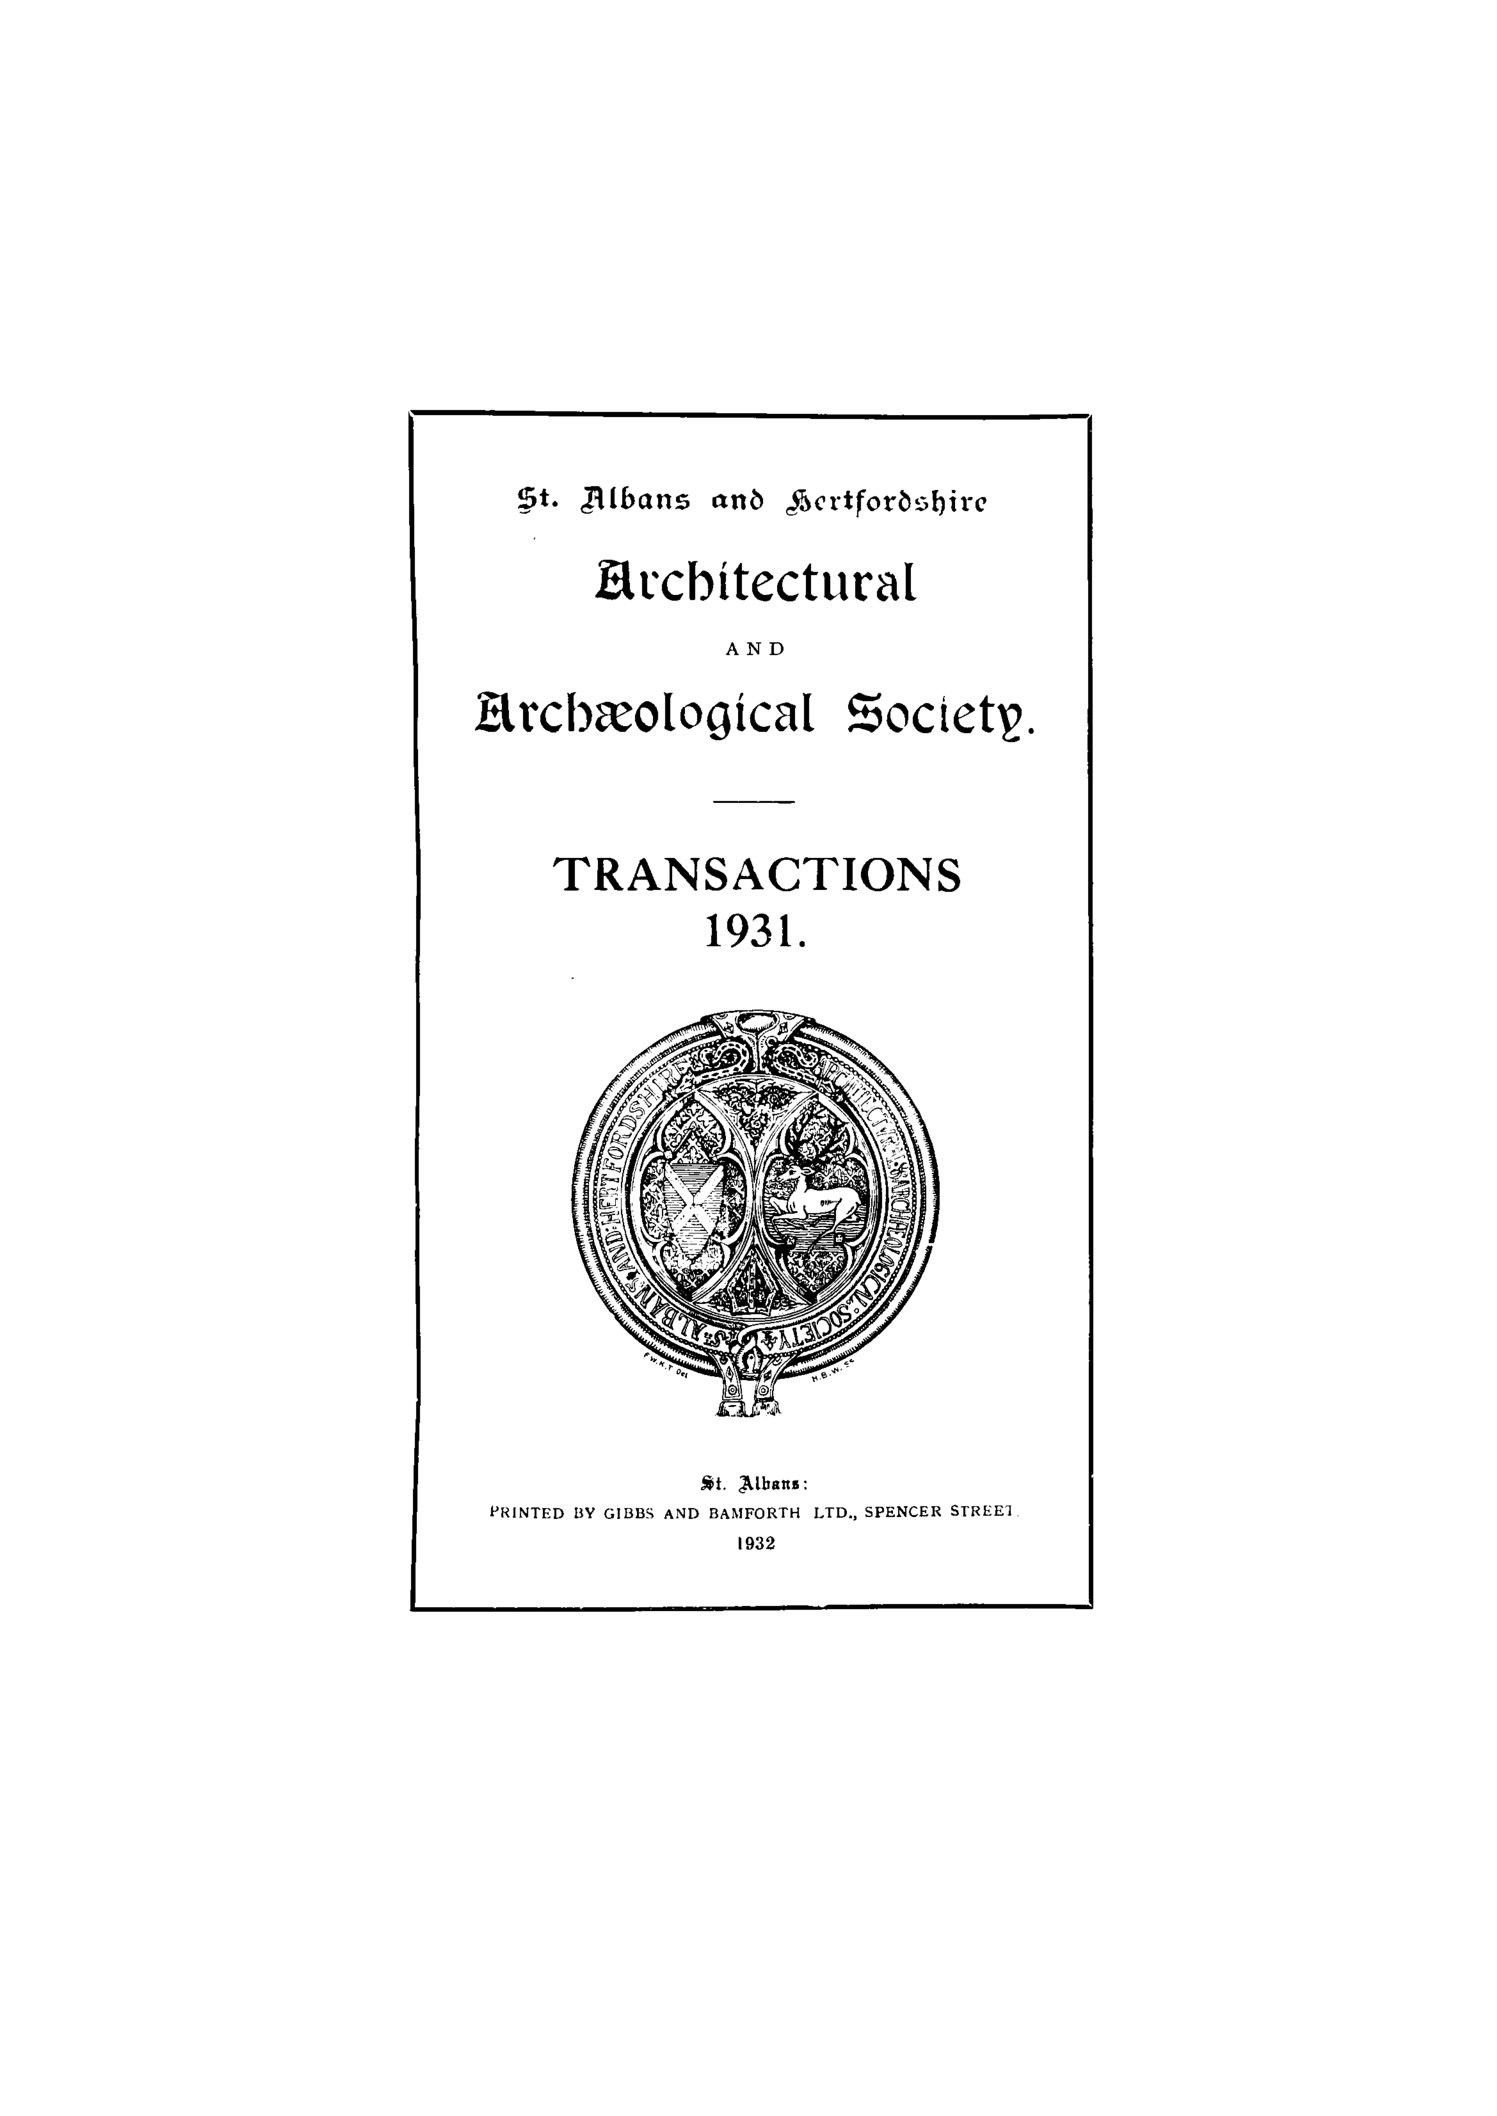 Transactions of the Society (1931)